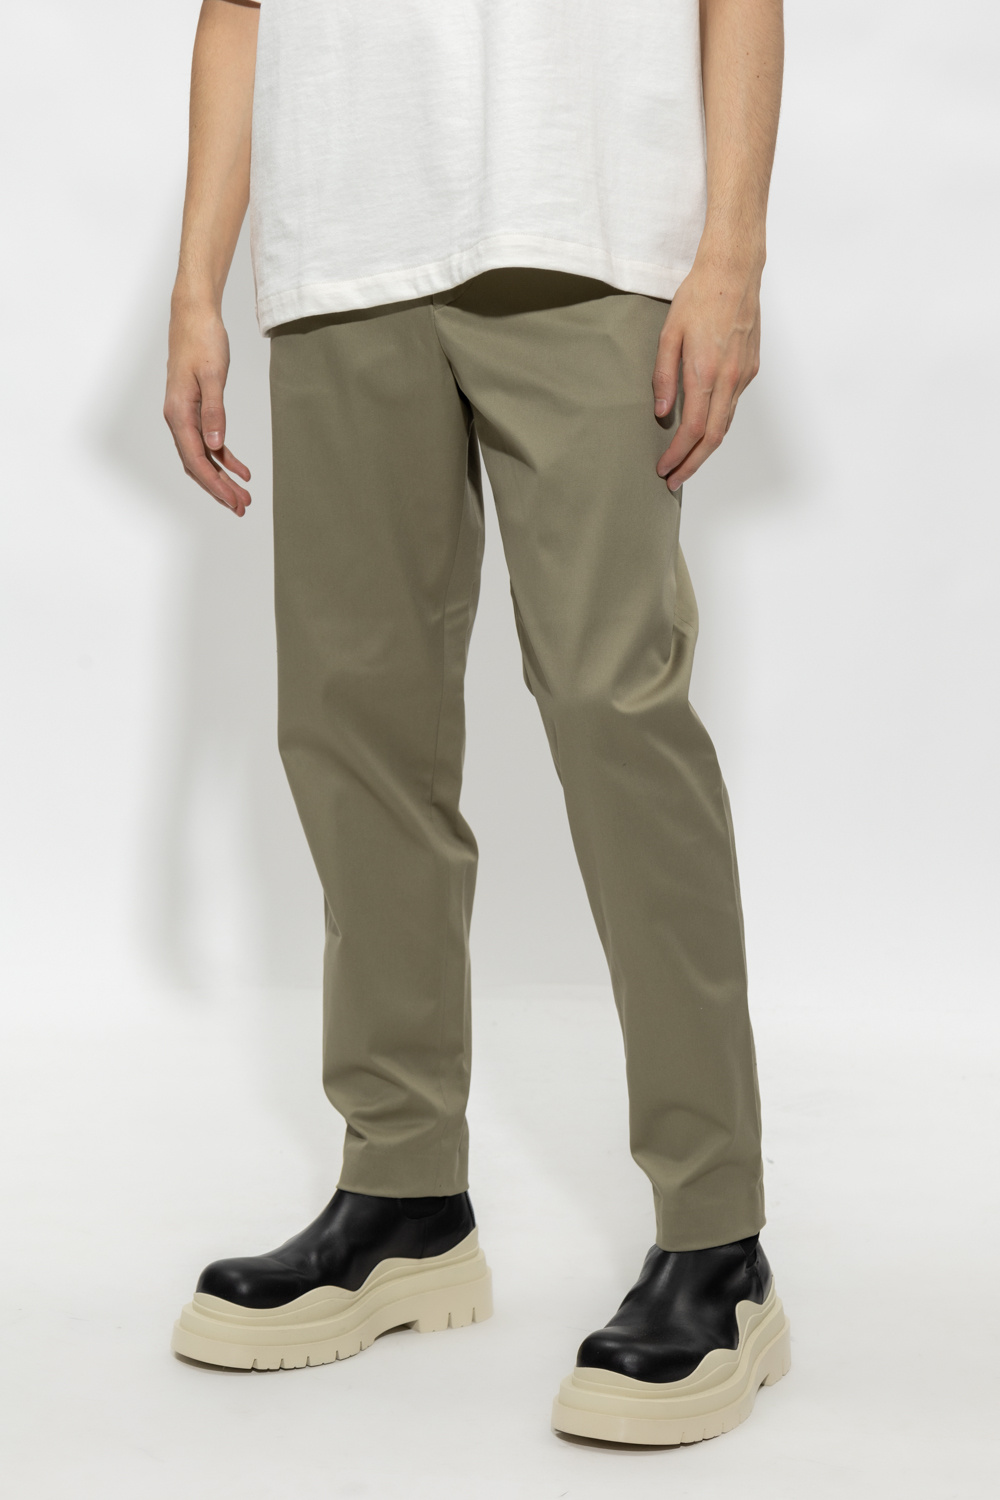 Paul Smith Pleat-front Polo trousers